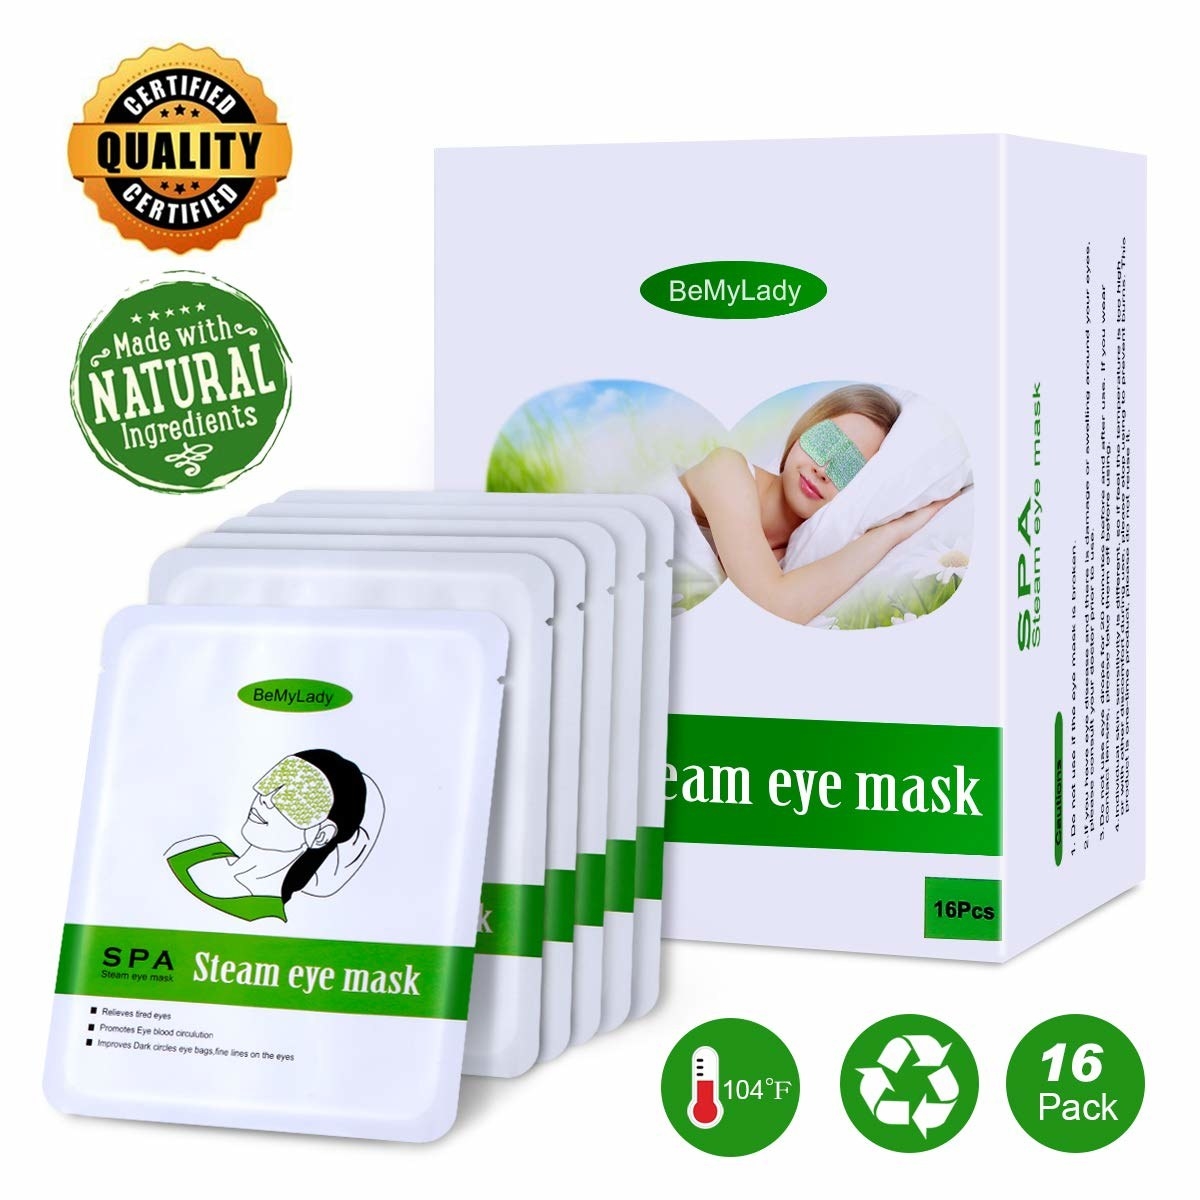 The box and packs of  the steam eye mask